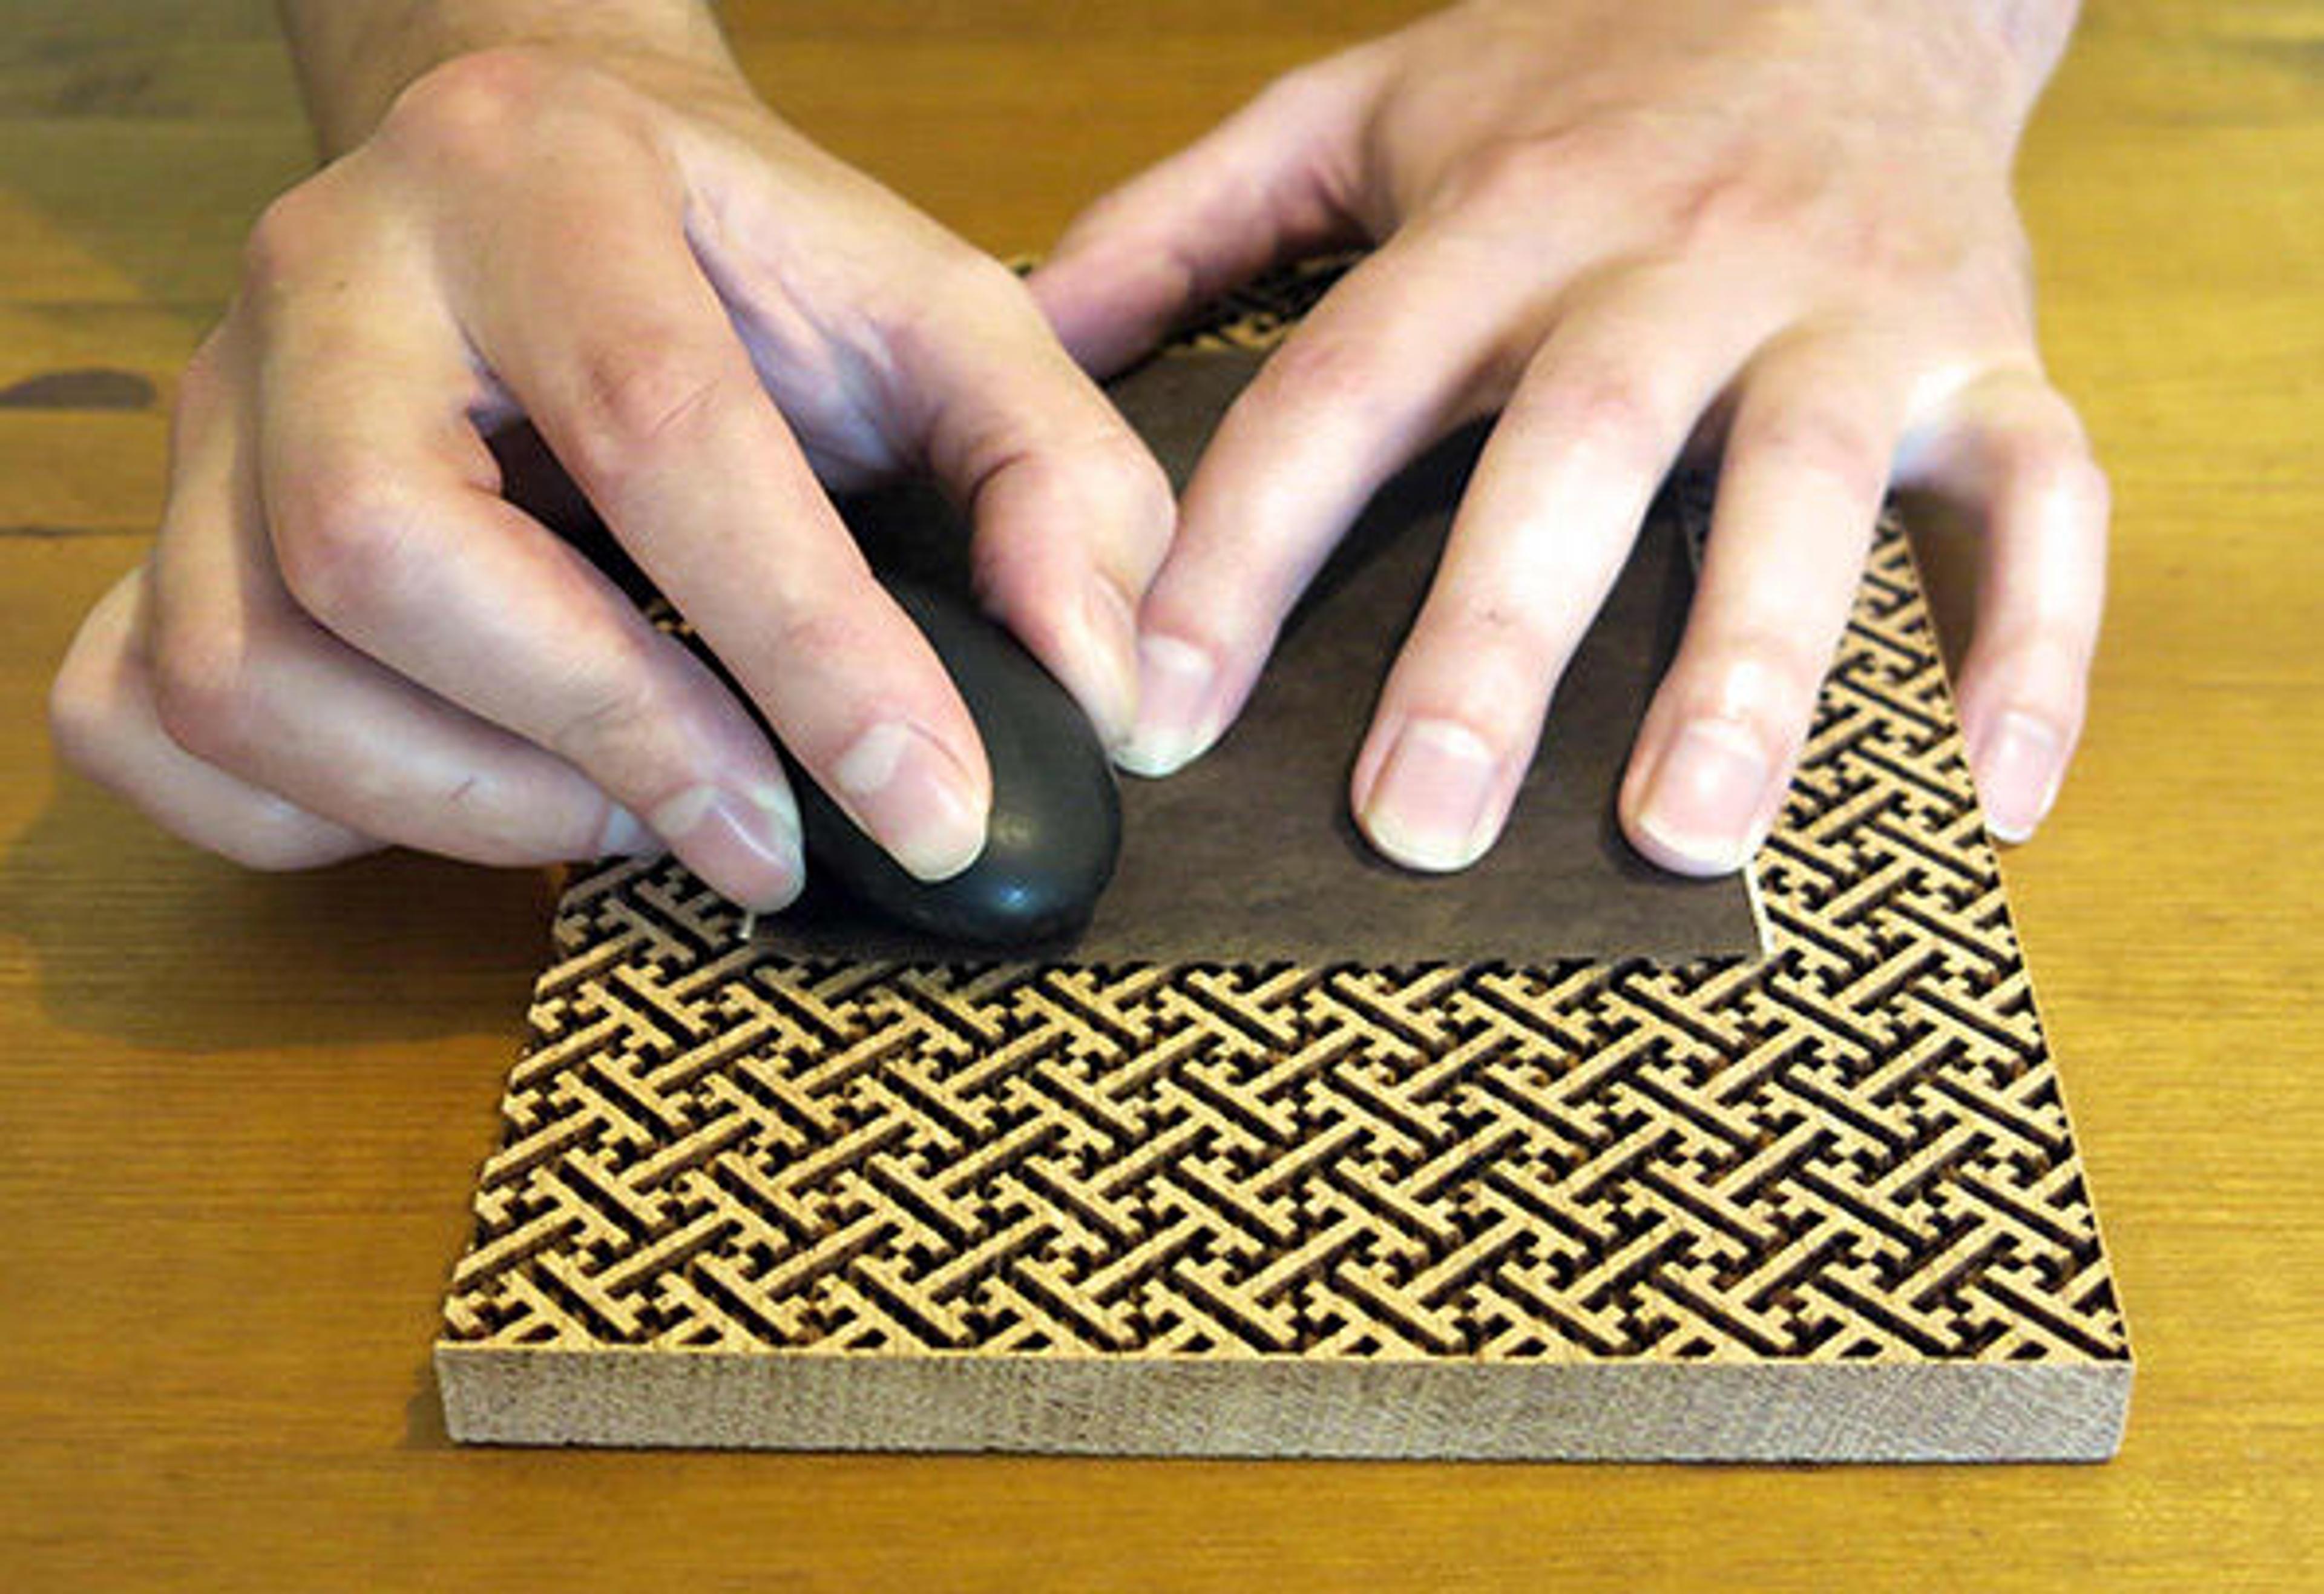 Kazuko Hioki’s slide showing how a stone was used to create decorative burnished papers by rubbing over a textured wood block